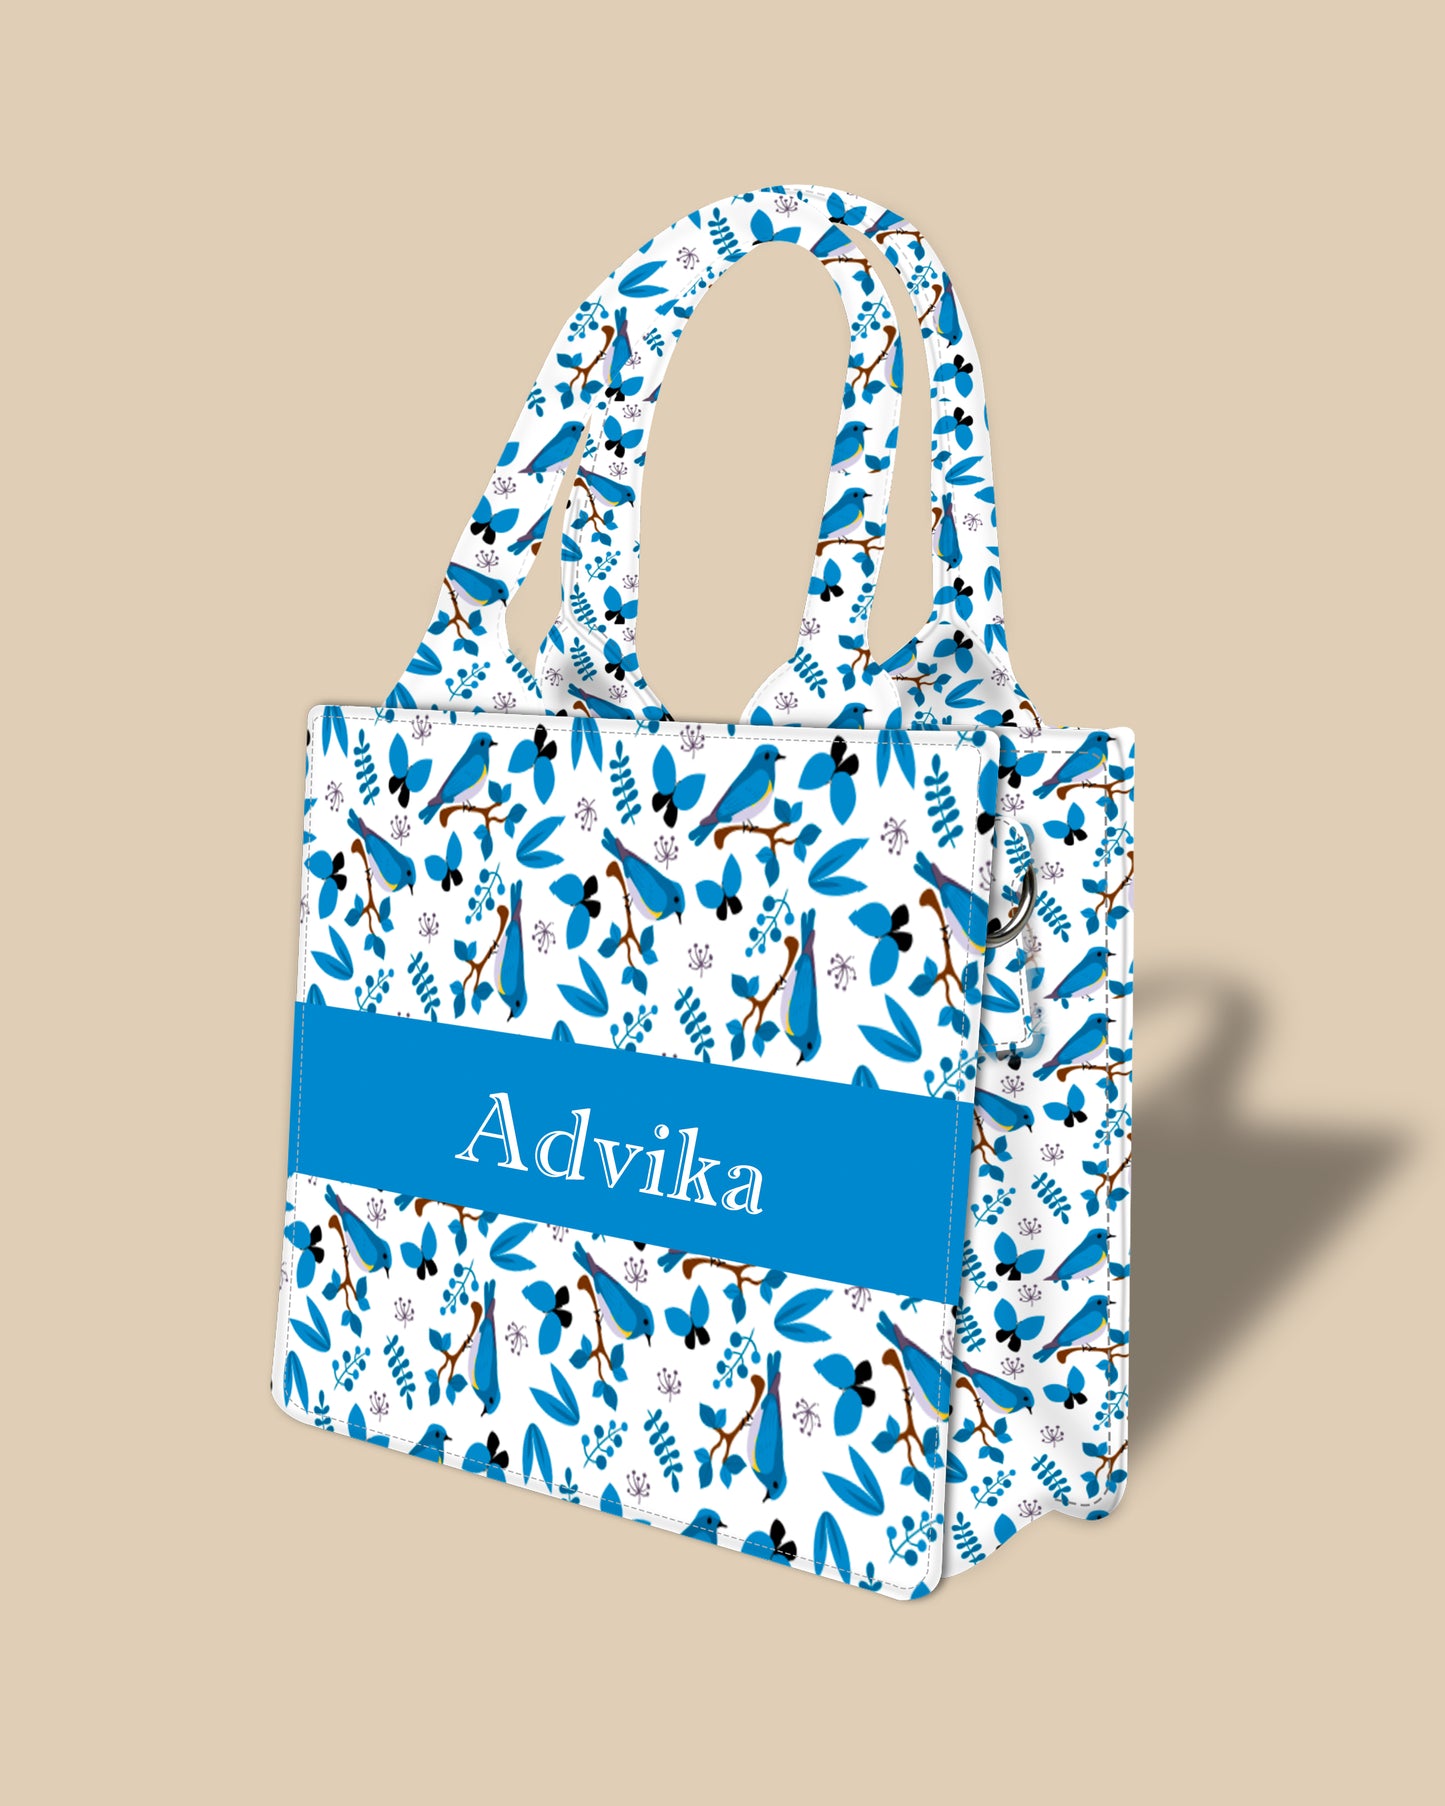 Customized Small Tote Bag Designed with Blue sparrow, Butterfly And Botanical Leaves